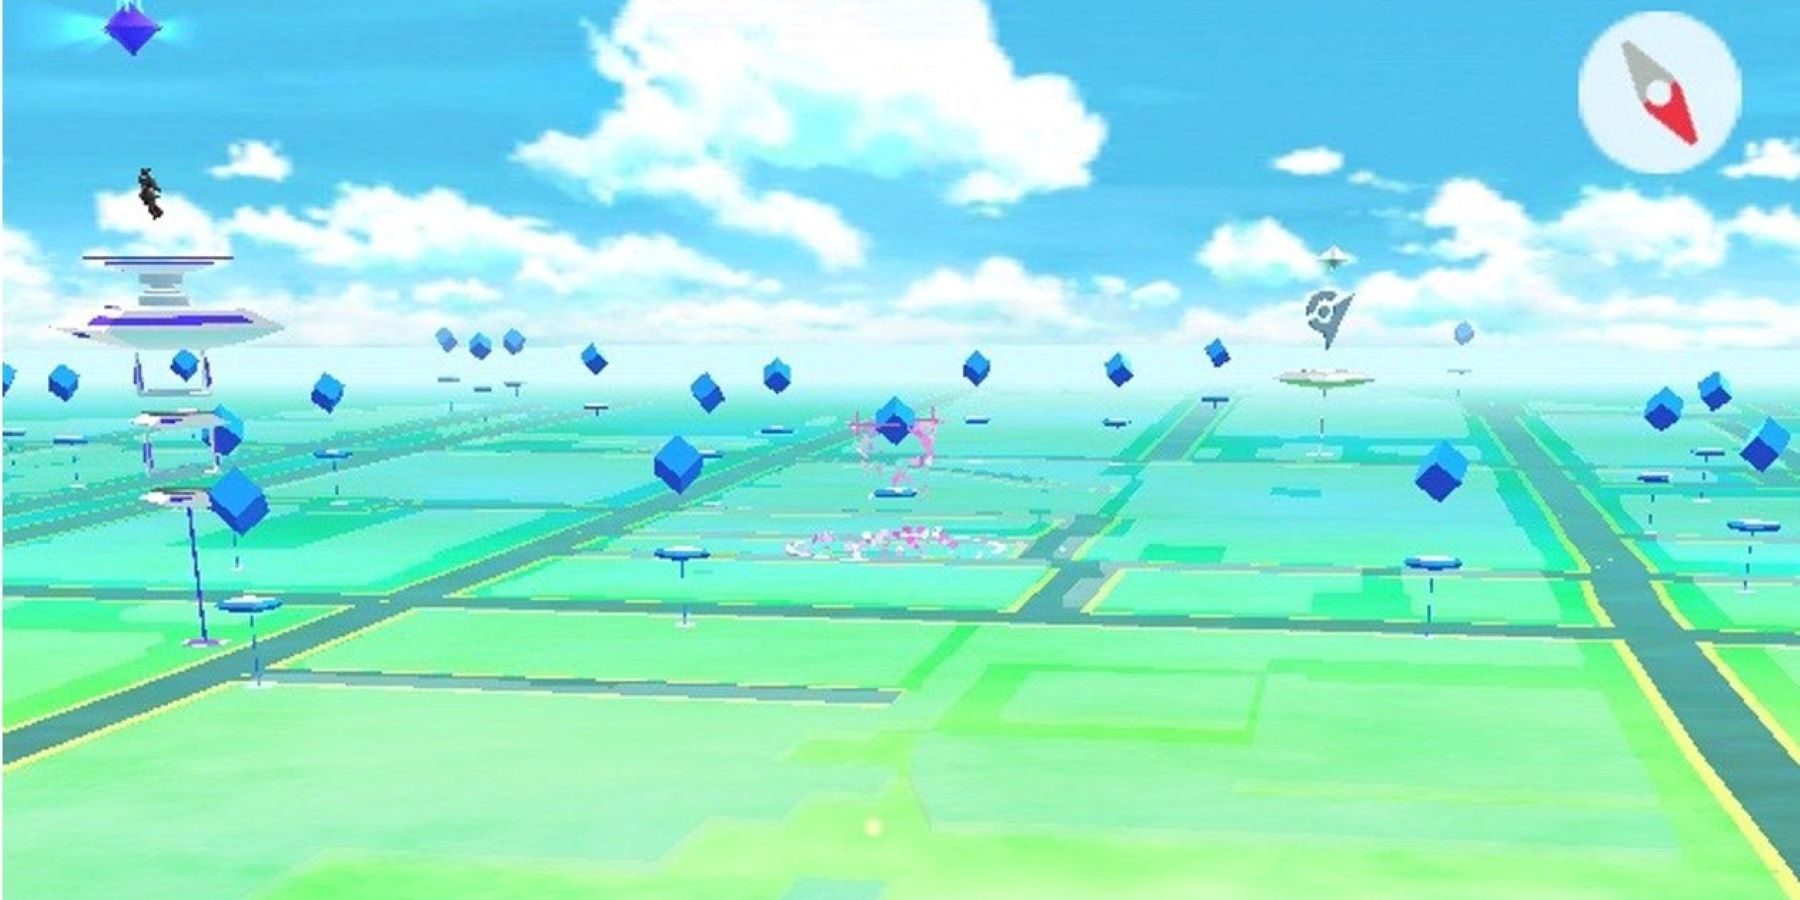 A Pokemon GO screenshot with many PokeStops and two Gyms visible